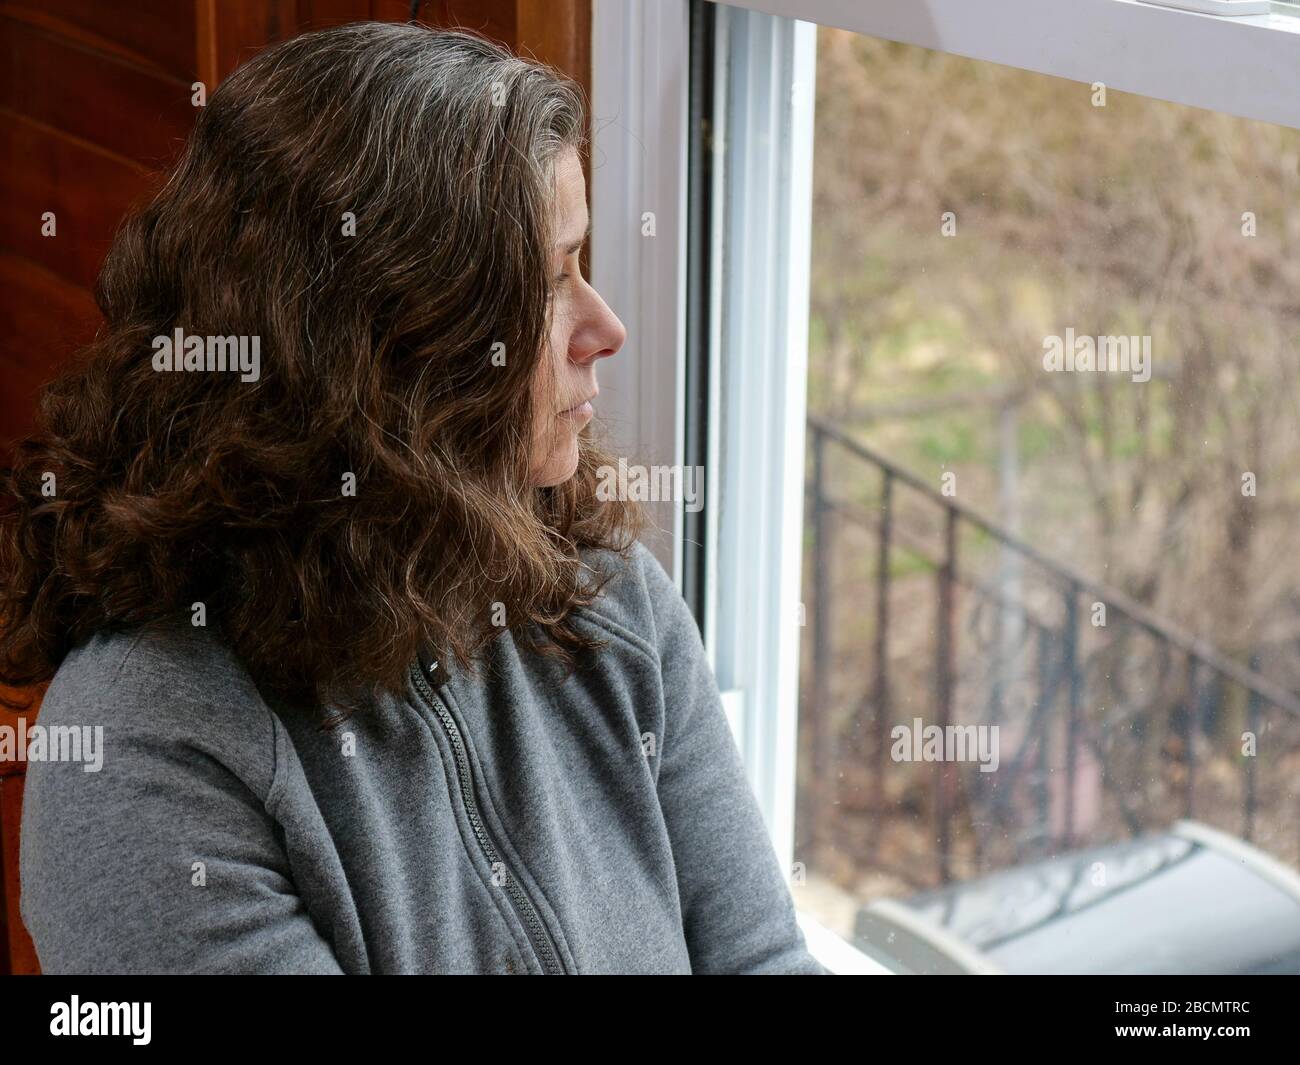 Oak Park, Illinois, USA. 4th April, 2020. A woman looks out her kitchen window during COVID-19 shelter-in-place order. Being stuck at home can bring feelings of isolation and loneliness. Stock Photo